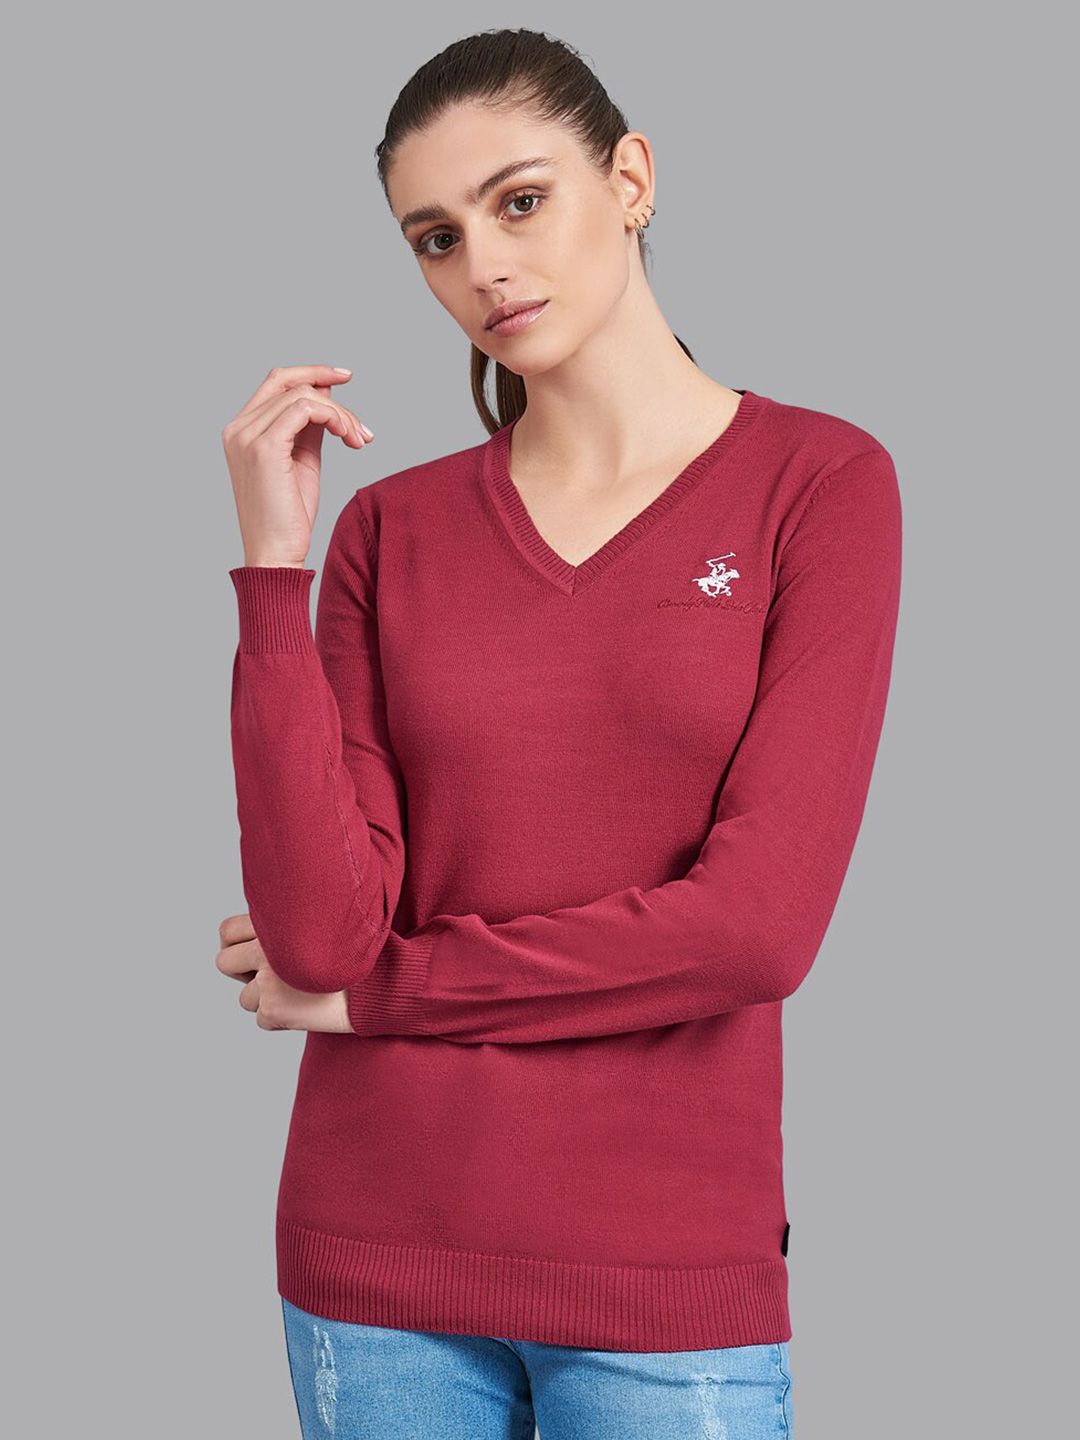 Beverly Hills Polo Club Women Burgundy Solid Pullover Price in India